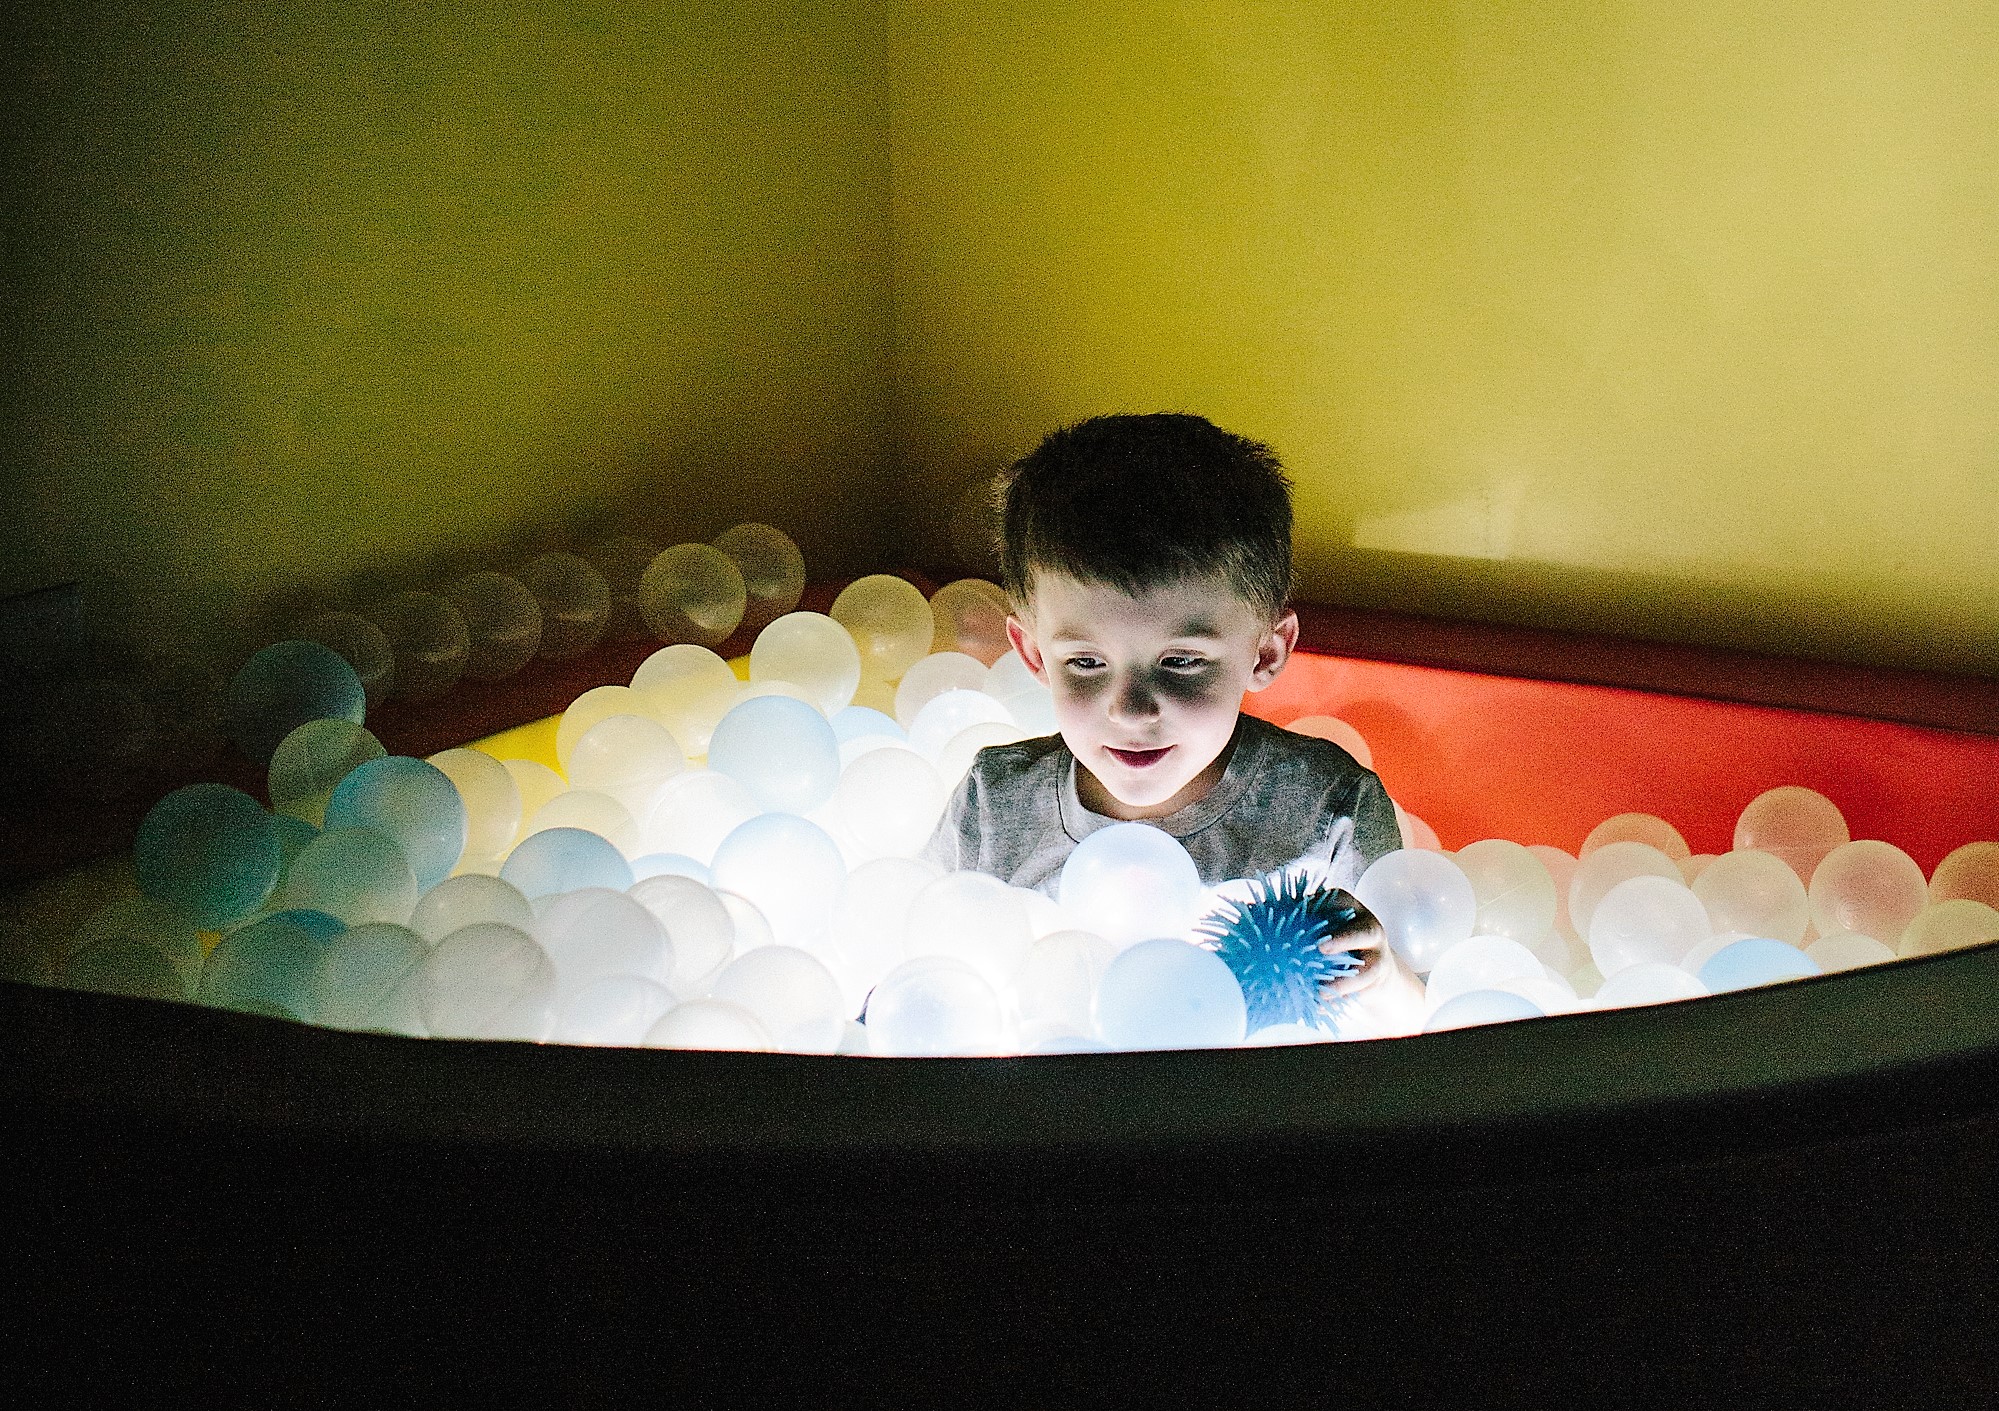 Tri-county Therapy Glowing Ball Pit